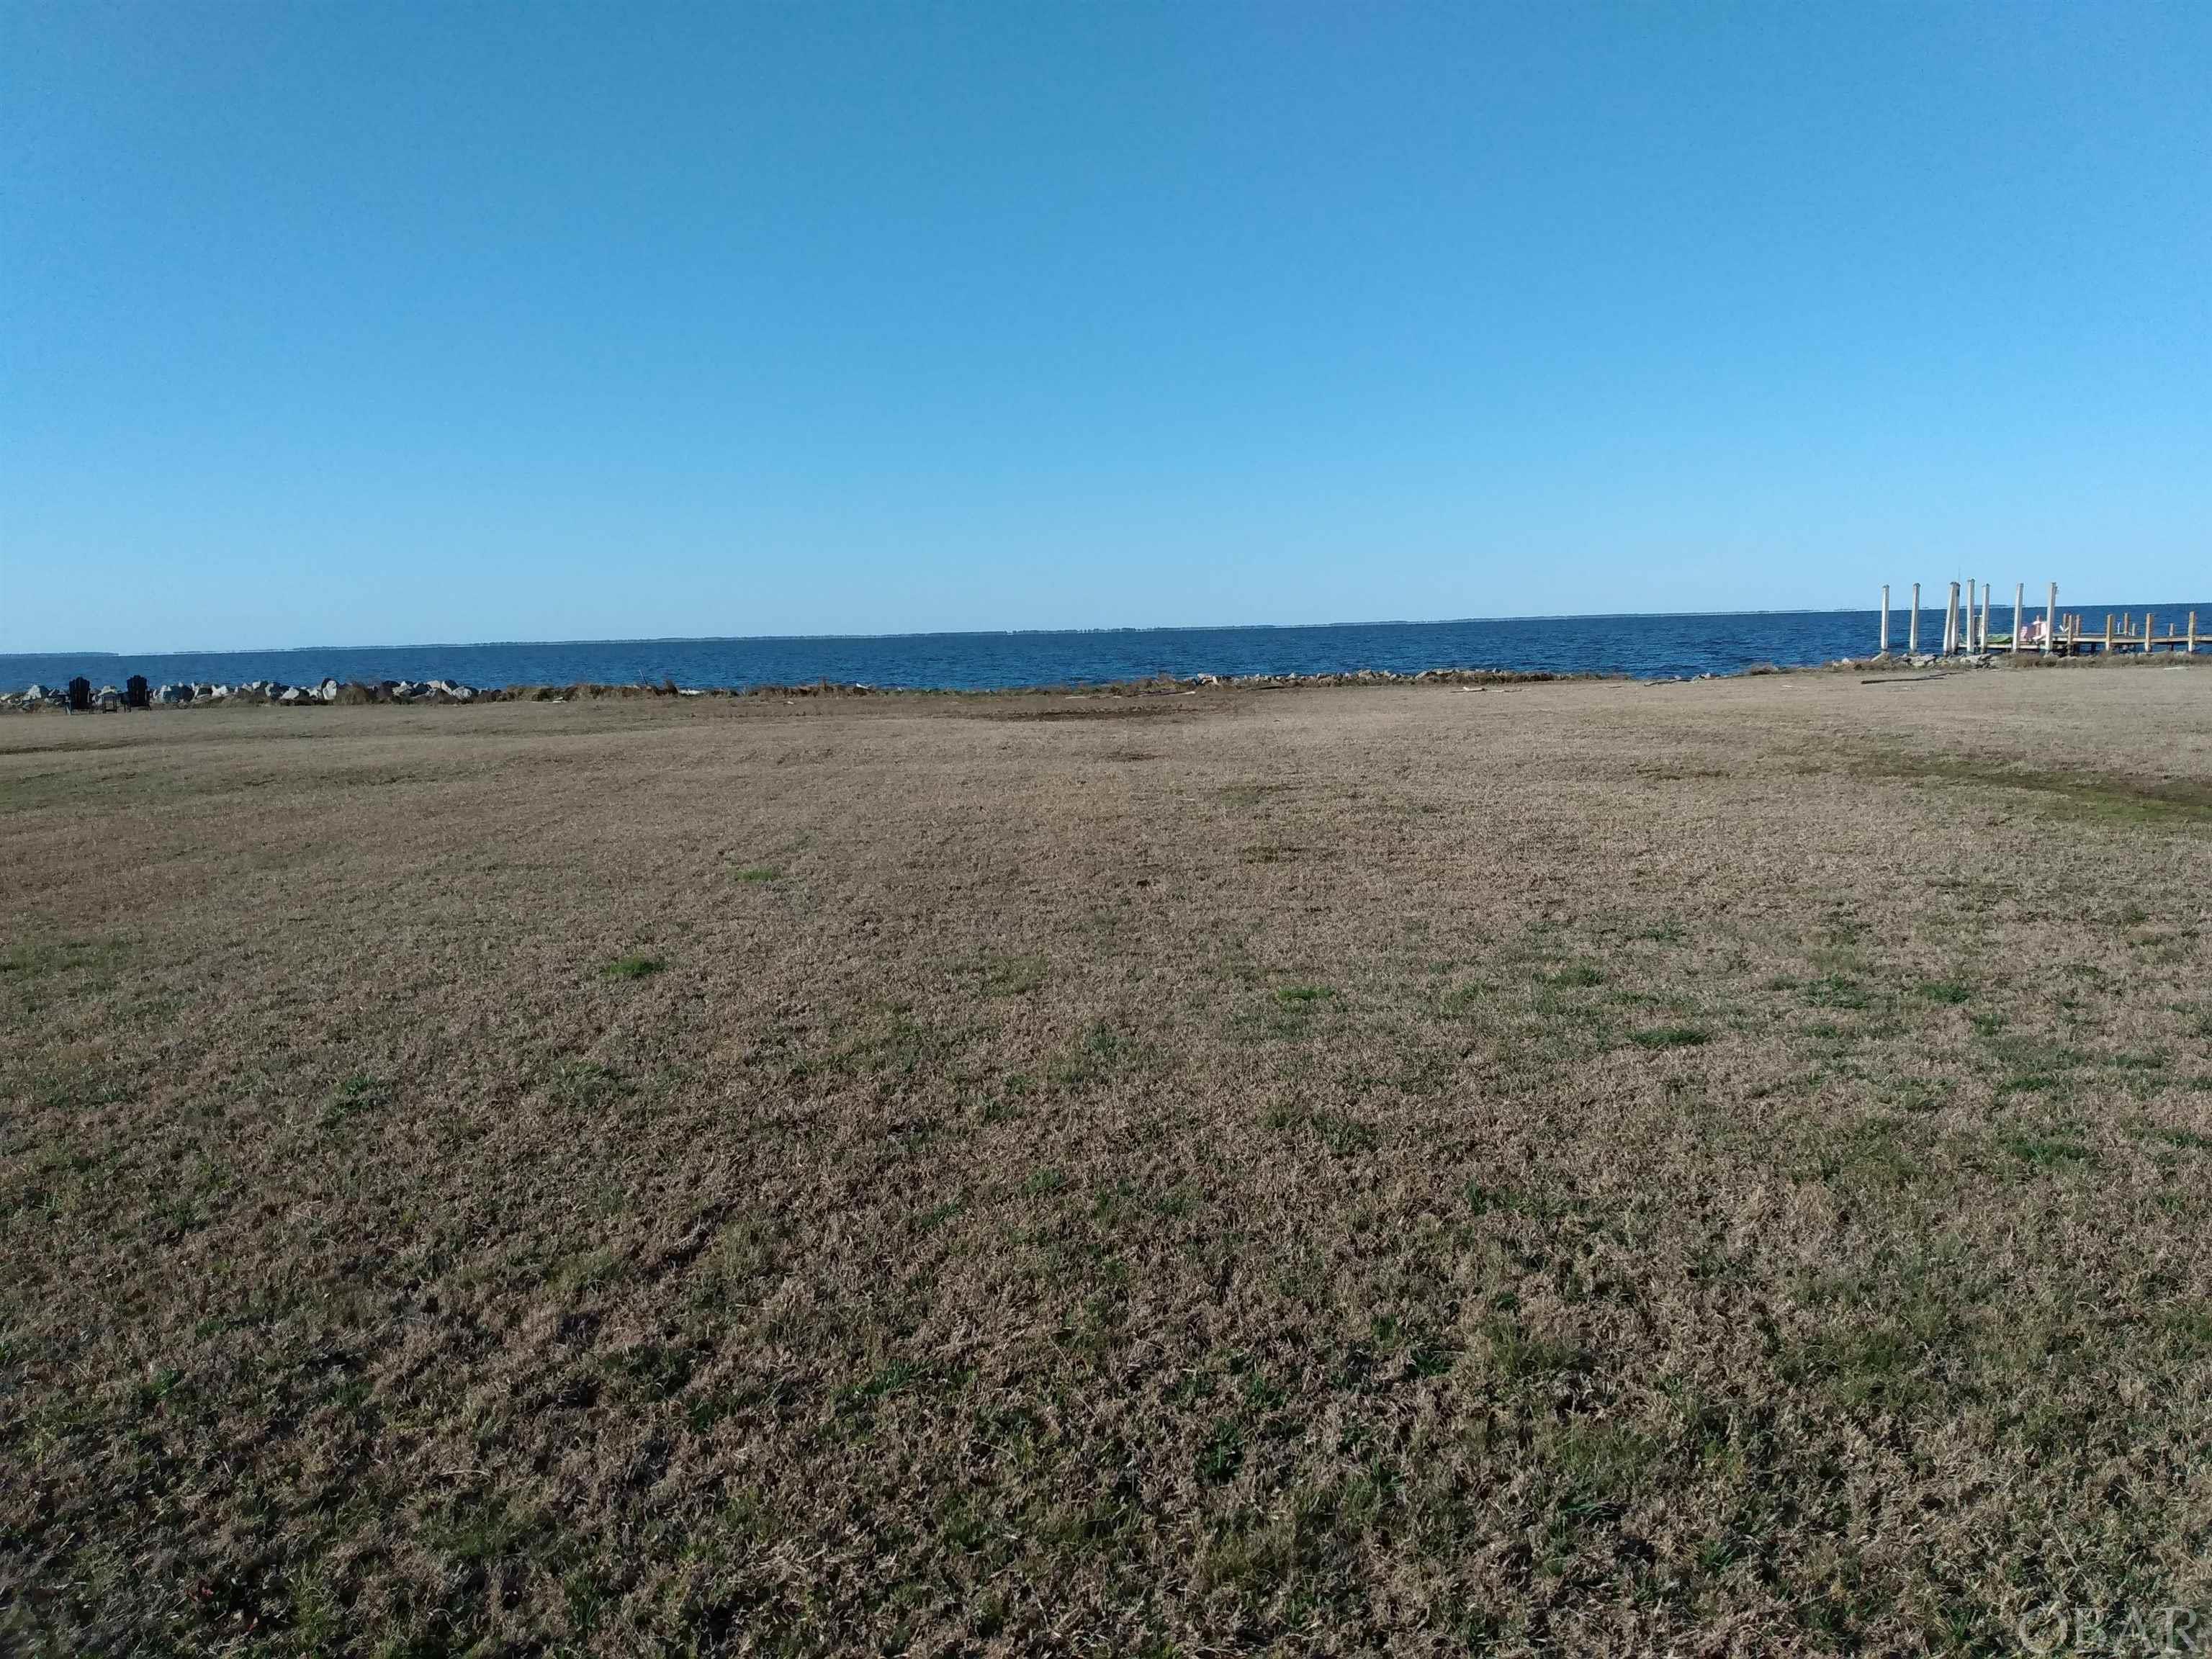 Enjoy spectacular water views and gorgeous sunsets from this waterfront lot on the Albemarle Sound! It has the rip rap shoreline stabilization structure and underground utilities. Septic system permit available. As this lot is not a part of the HOA there are no restrictions associated with this lot! To enhance your access to the sound you could possibly build a pier, dock and boat lift in the water. This property has the potential to meet all of your enjoyment and watersports needs! Just 5 miles north of Columbia, NC and within an hour to the NC Outer Banks! Offered at $89,500.